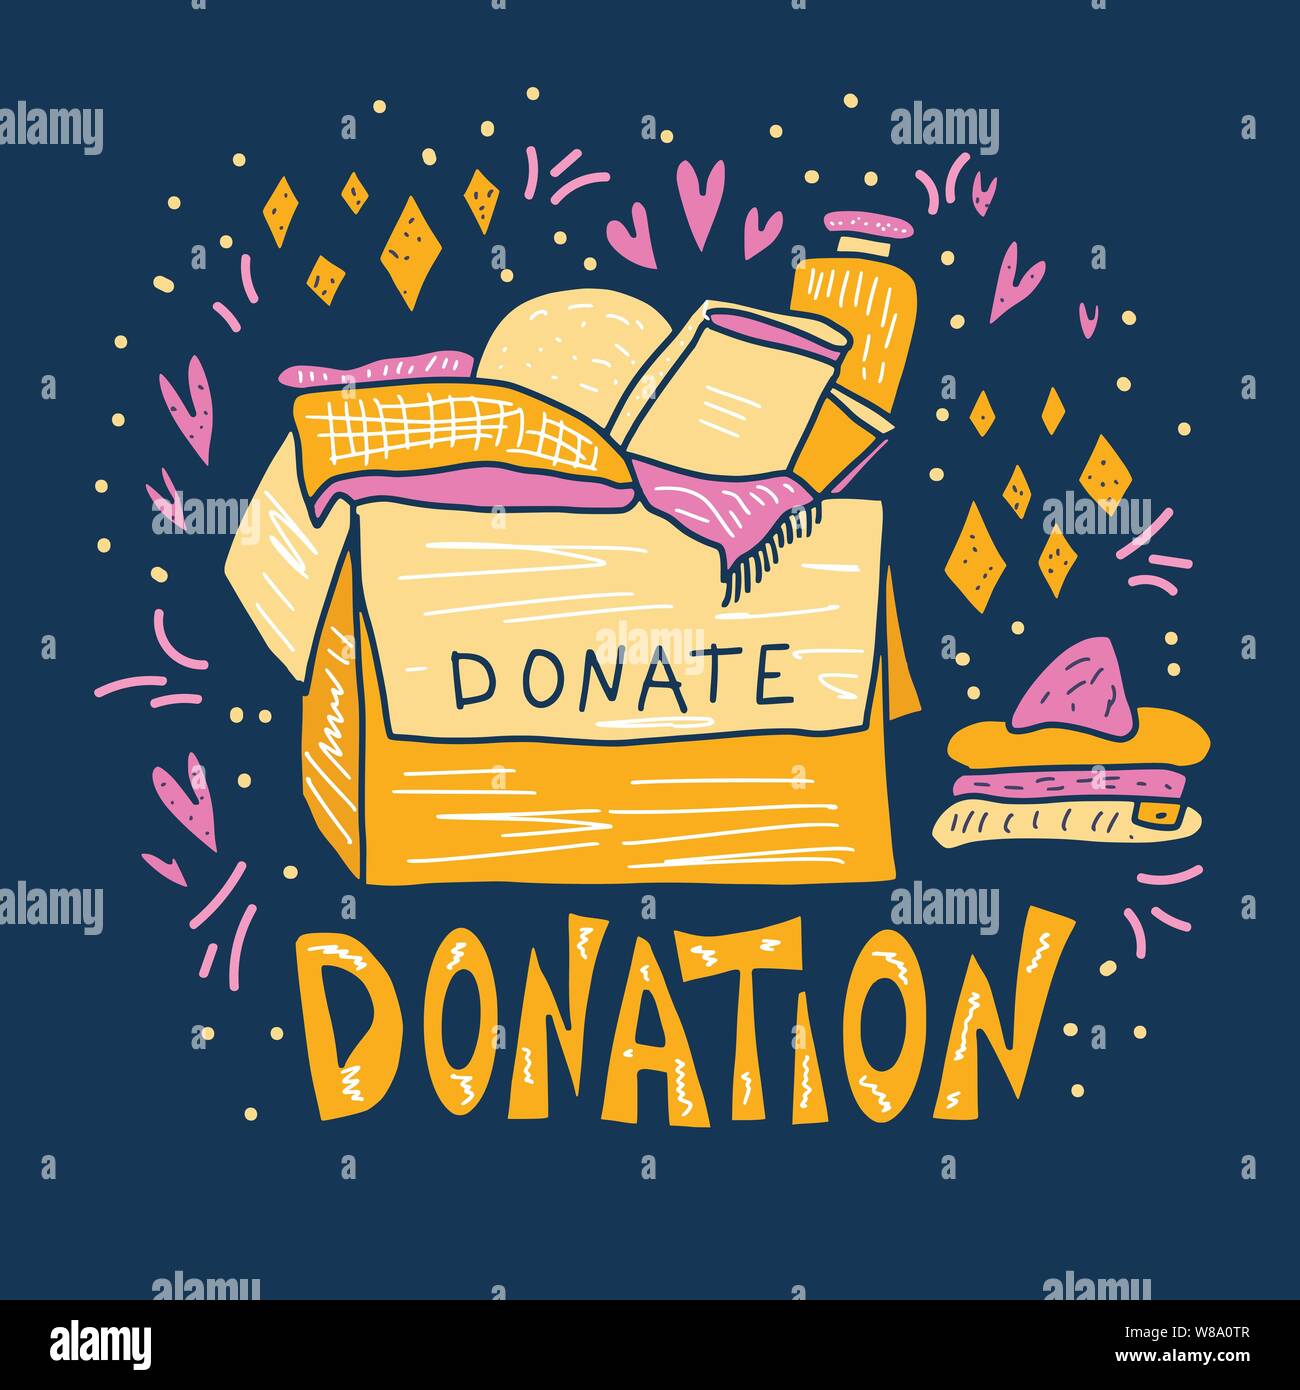 donation poster templates